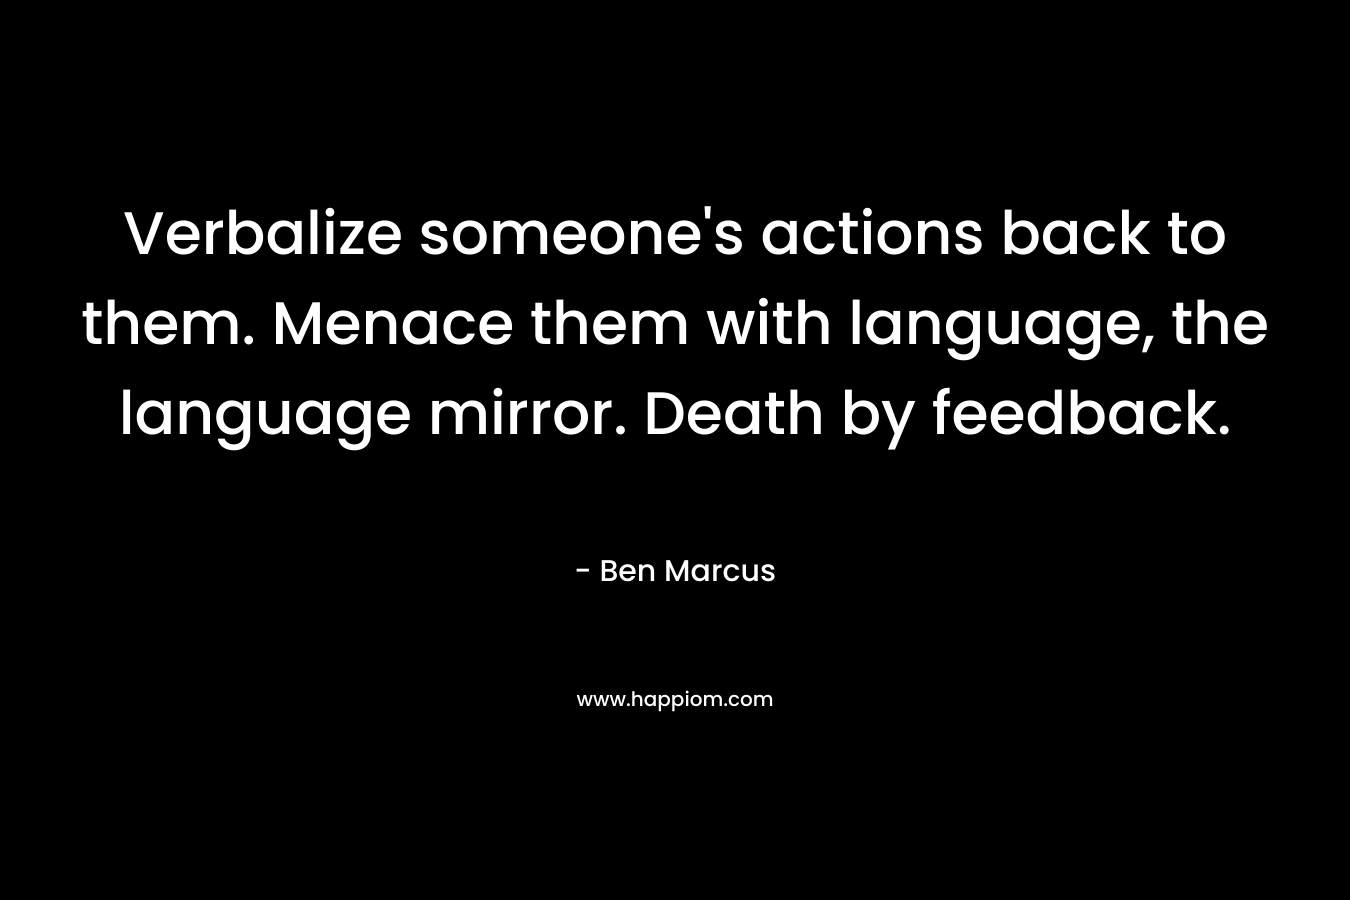 Verbalize someone’s actions back to them. Menace them with language, the language mirror. Death by feedback. – Ben Marcus